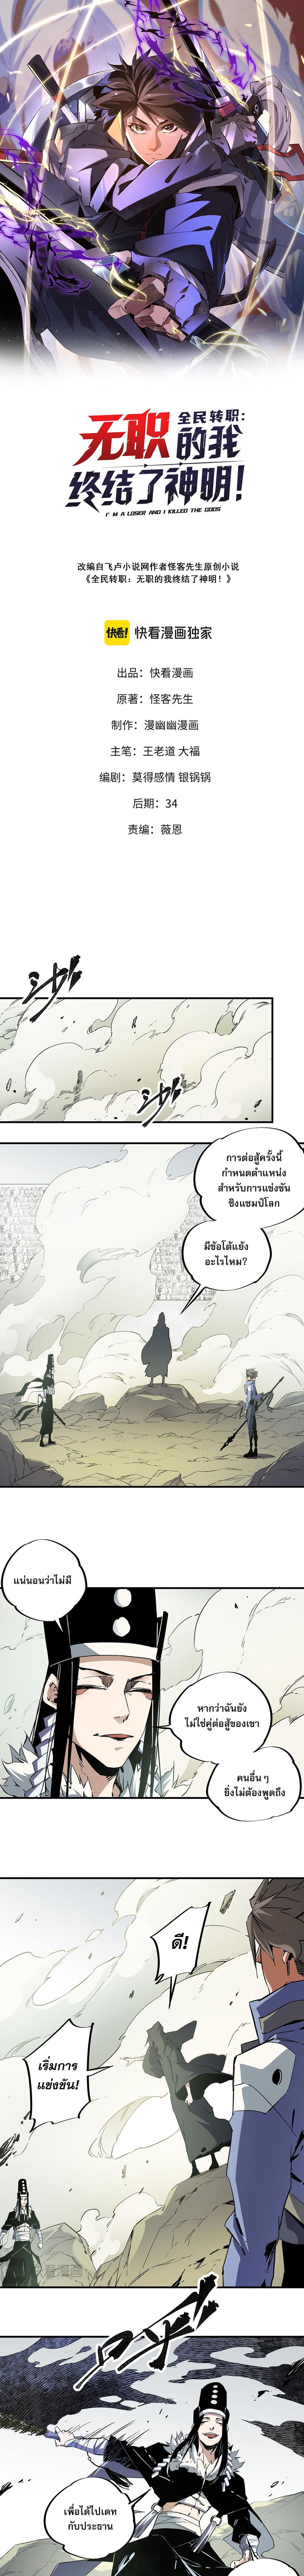 Job Changing for the Entire Population: The Jobless Me Will Terminate the Gods ฉันคือผู้เล่นไร้อาชีพที่สังหารเหล่าเทพ 58-58